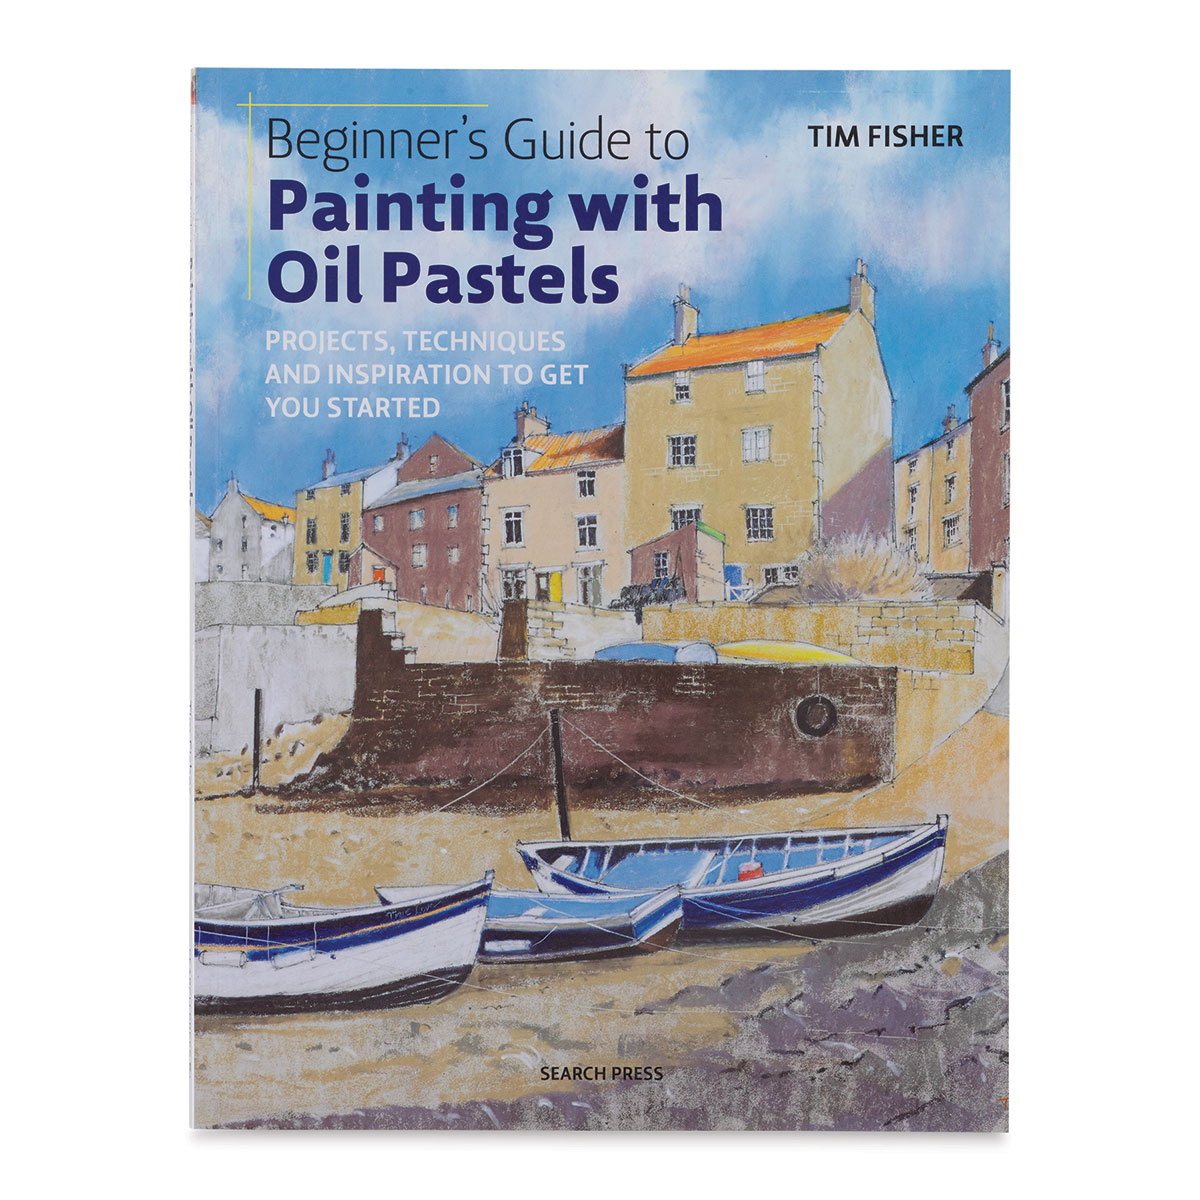 Beginners Guide to Painting with Oil Pastels